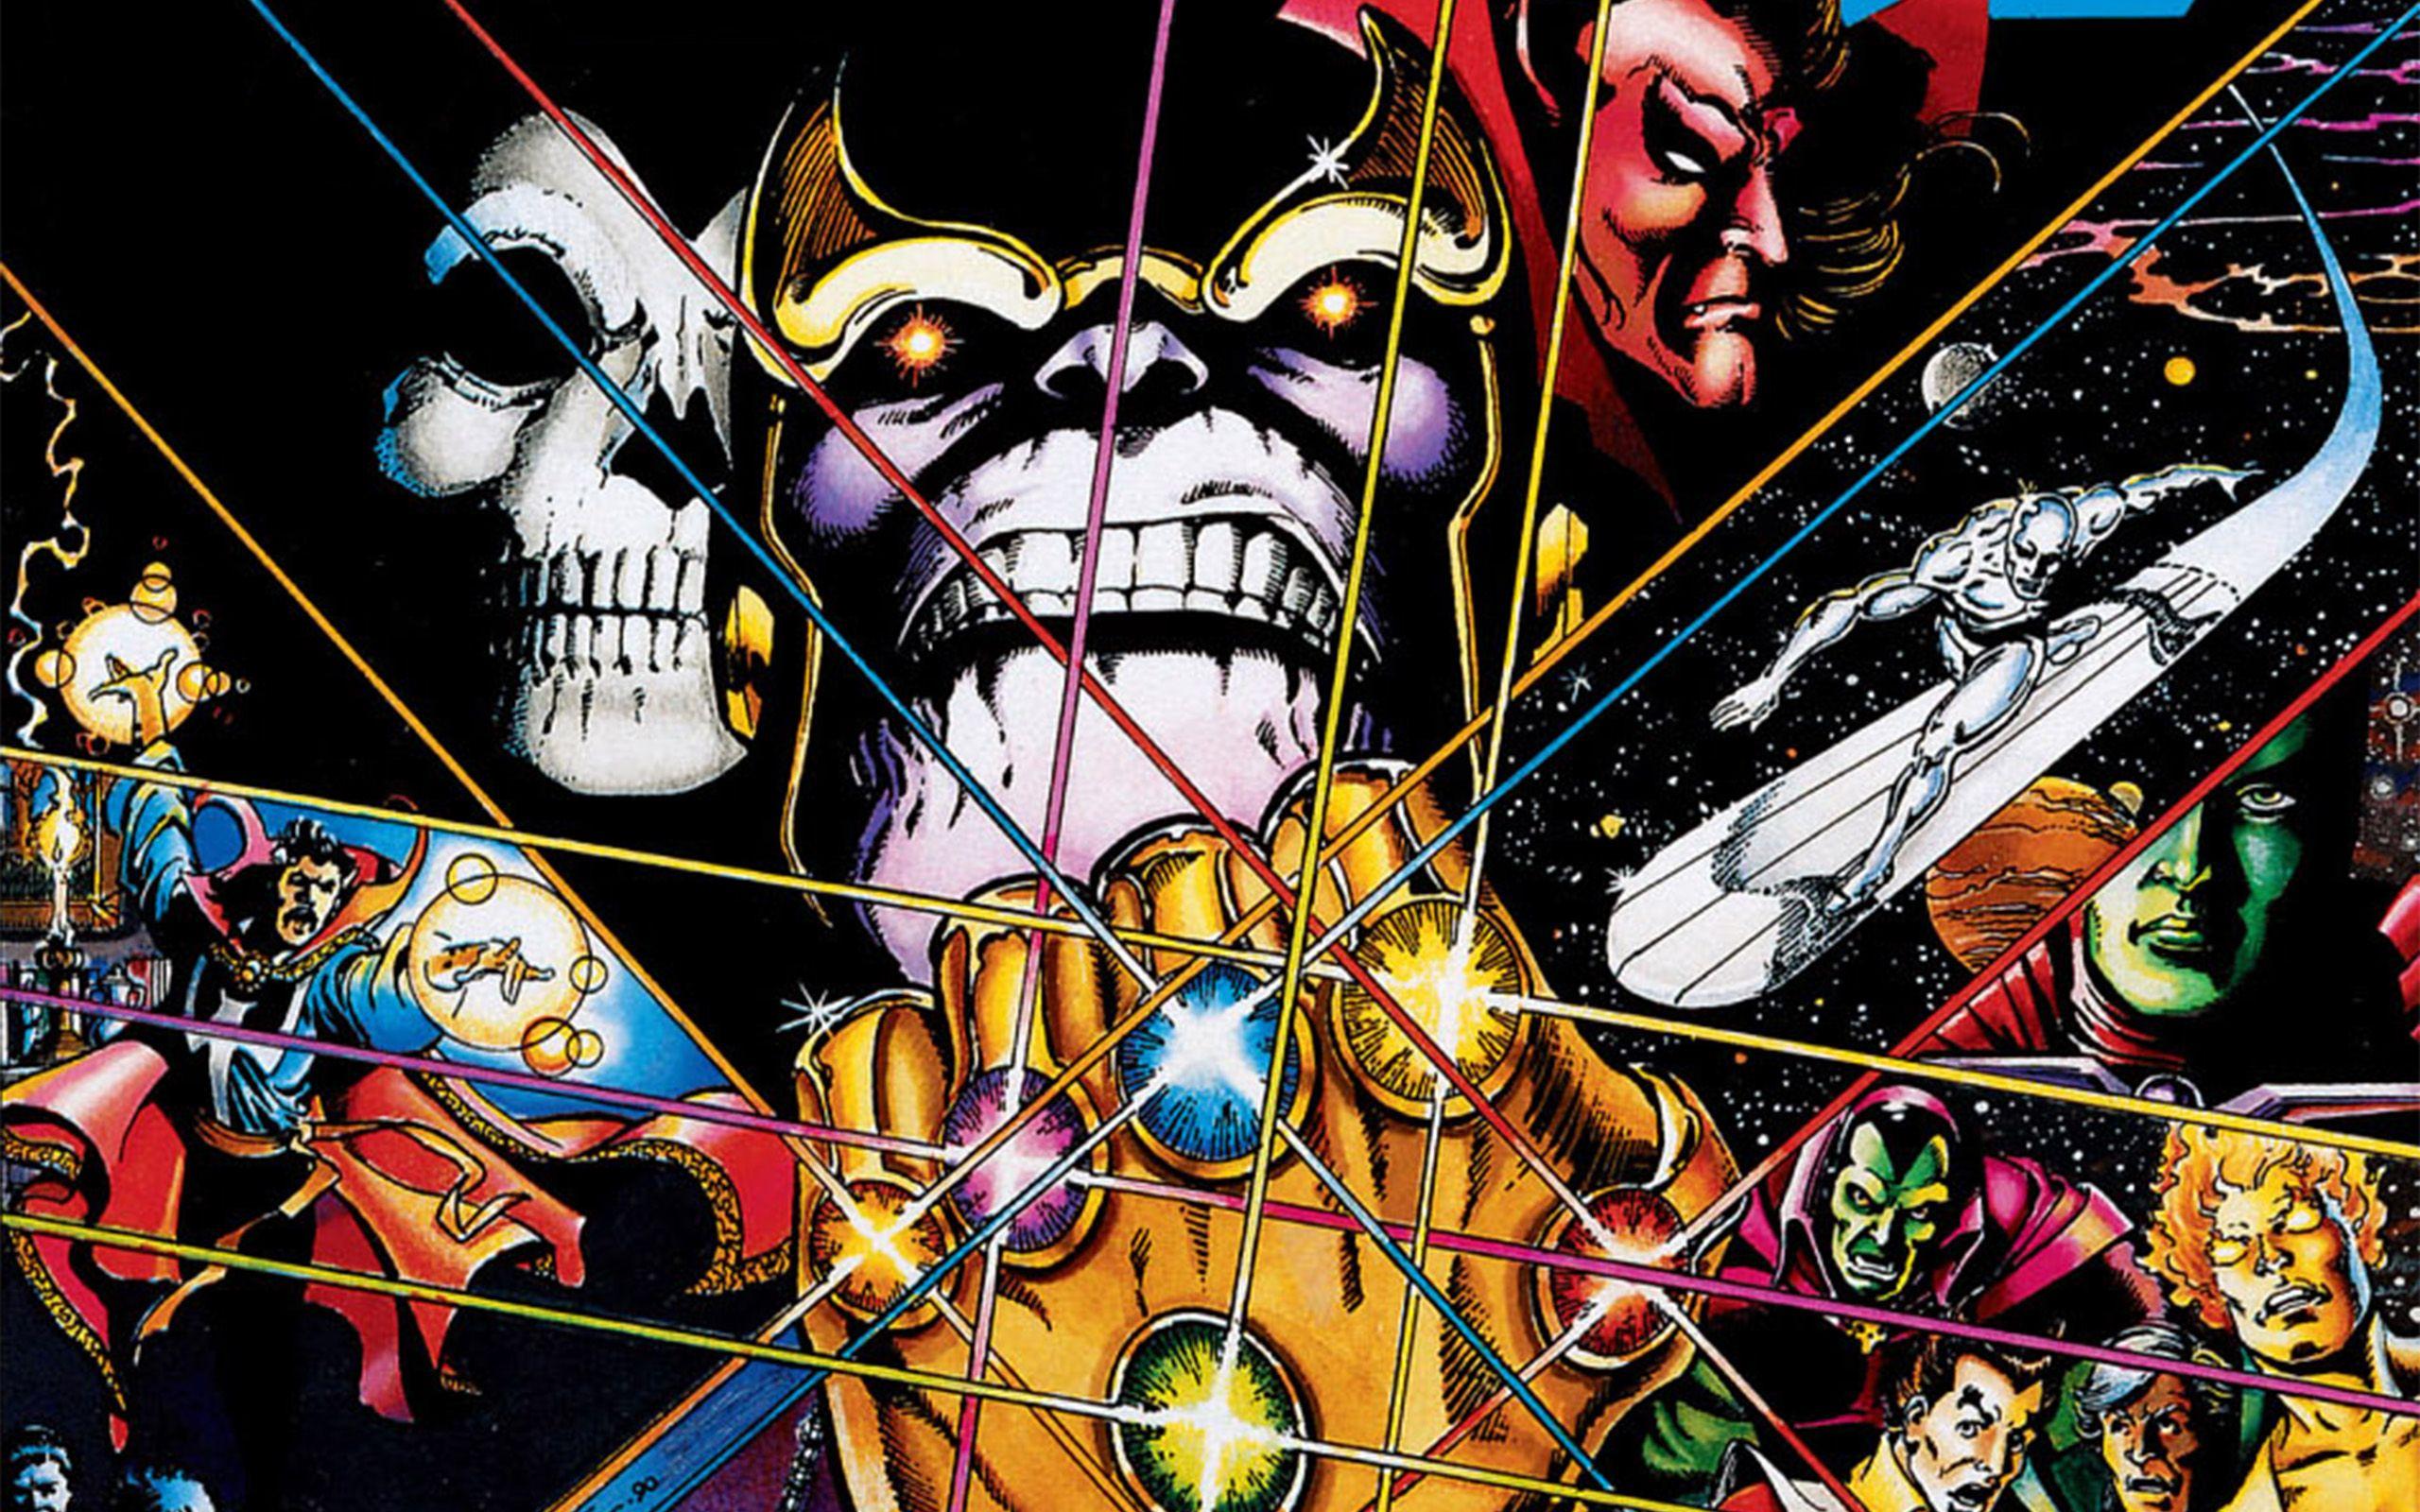 Just How Crazy Will Avengers Infinity Wars Really Be?